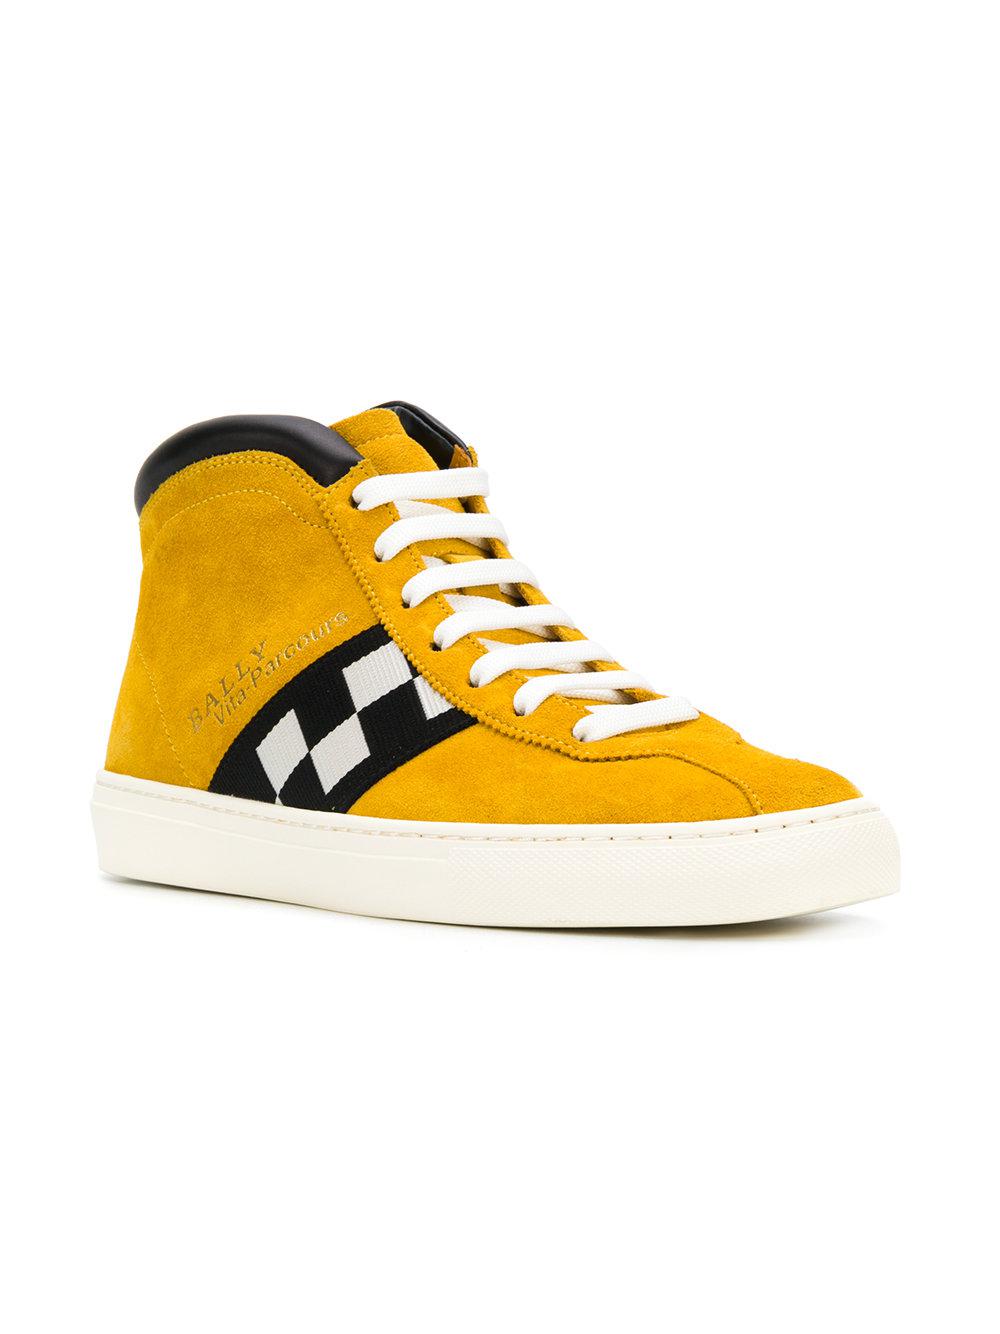 Bally Suede Vita-parcours Sneakers in Yellow & Orange (Yellow) for Men -  Lyst